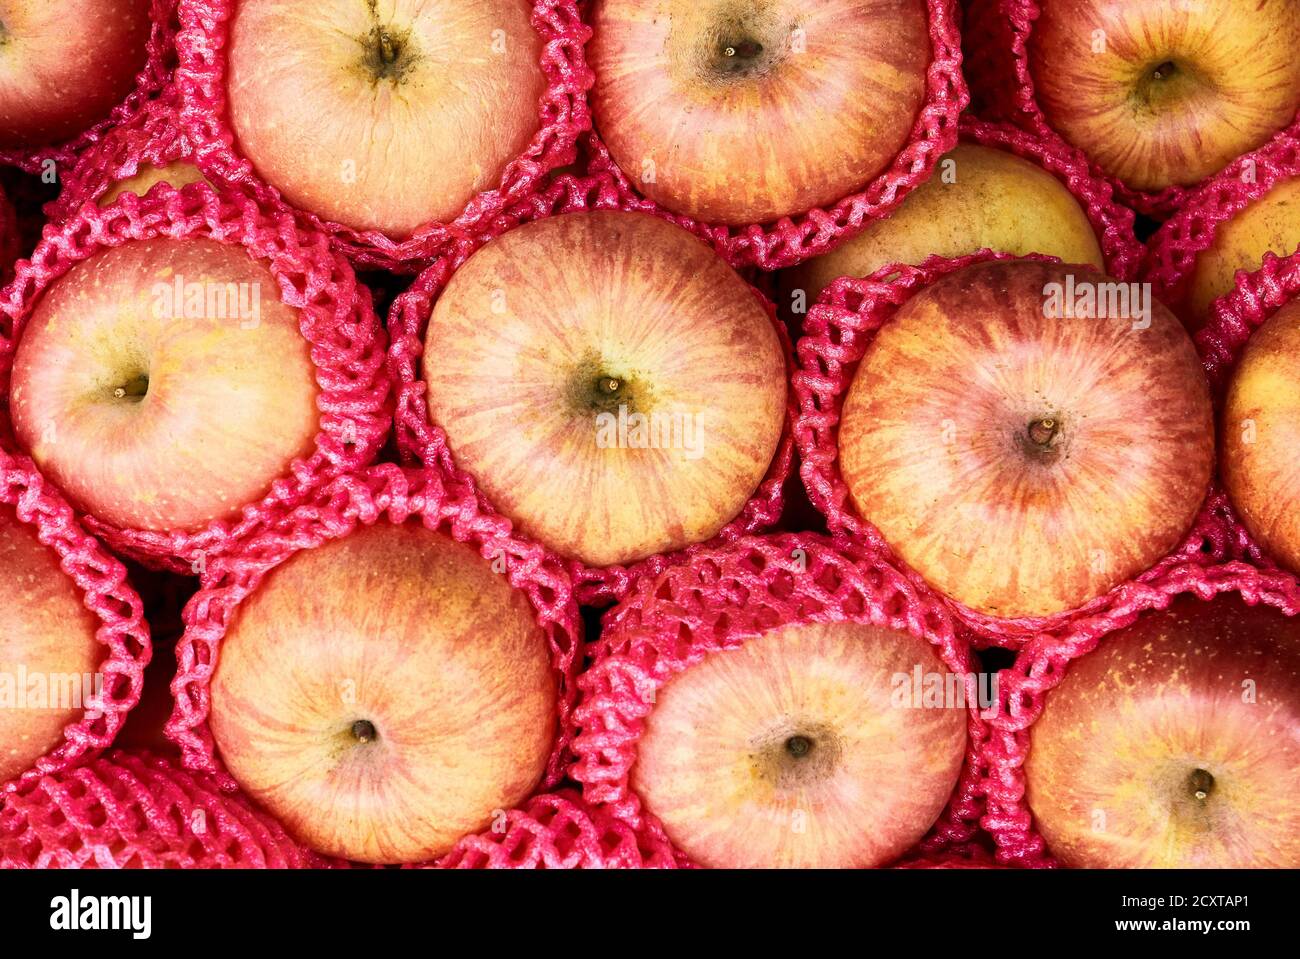 Close-up of a heap of yellow and red colored apples from China, wrapped individually in plastic net protectors, adding plastic waste tour environment Stock Photo